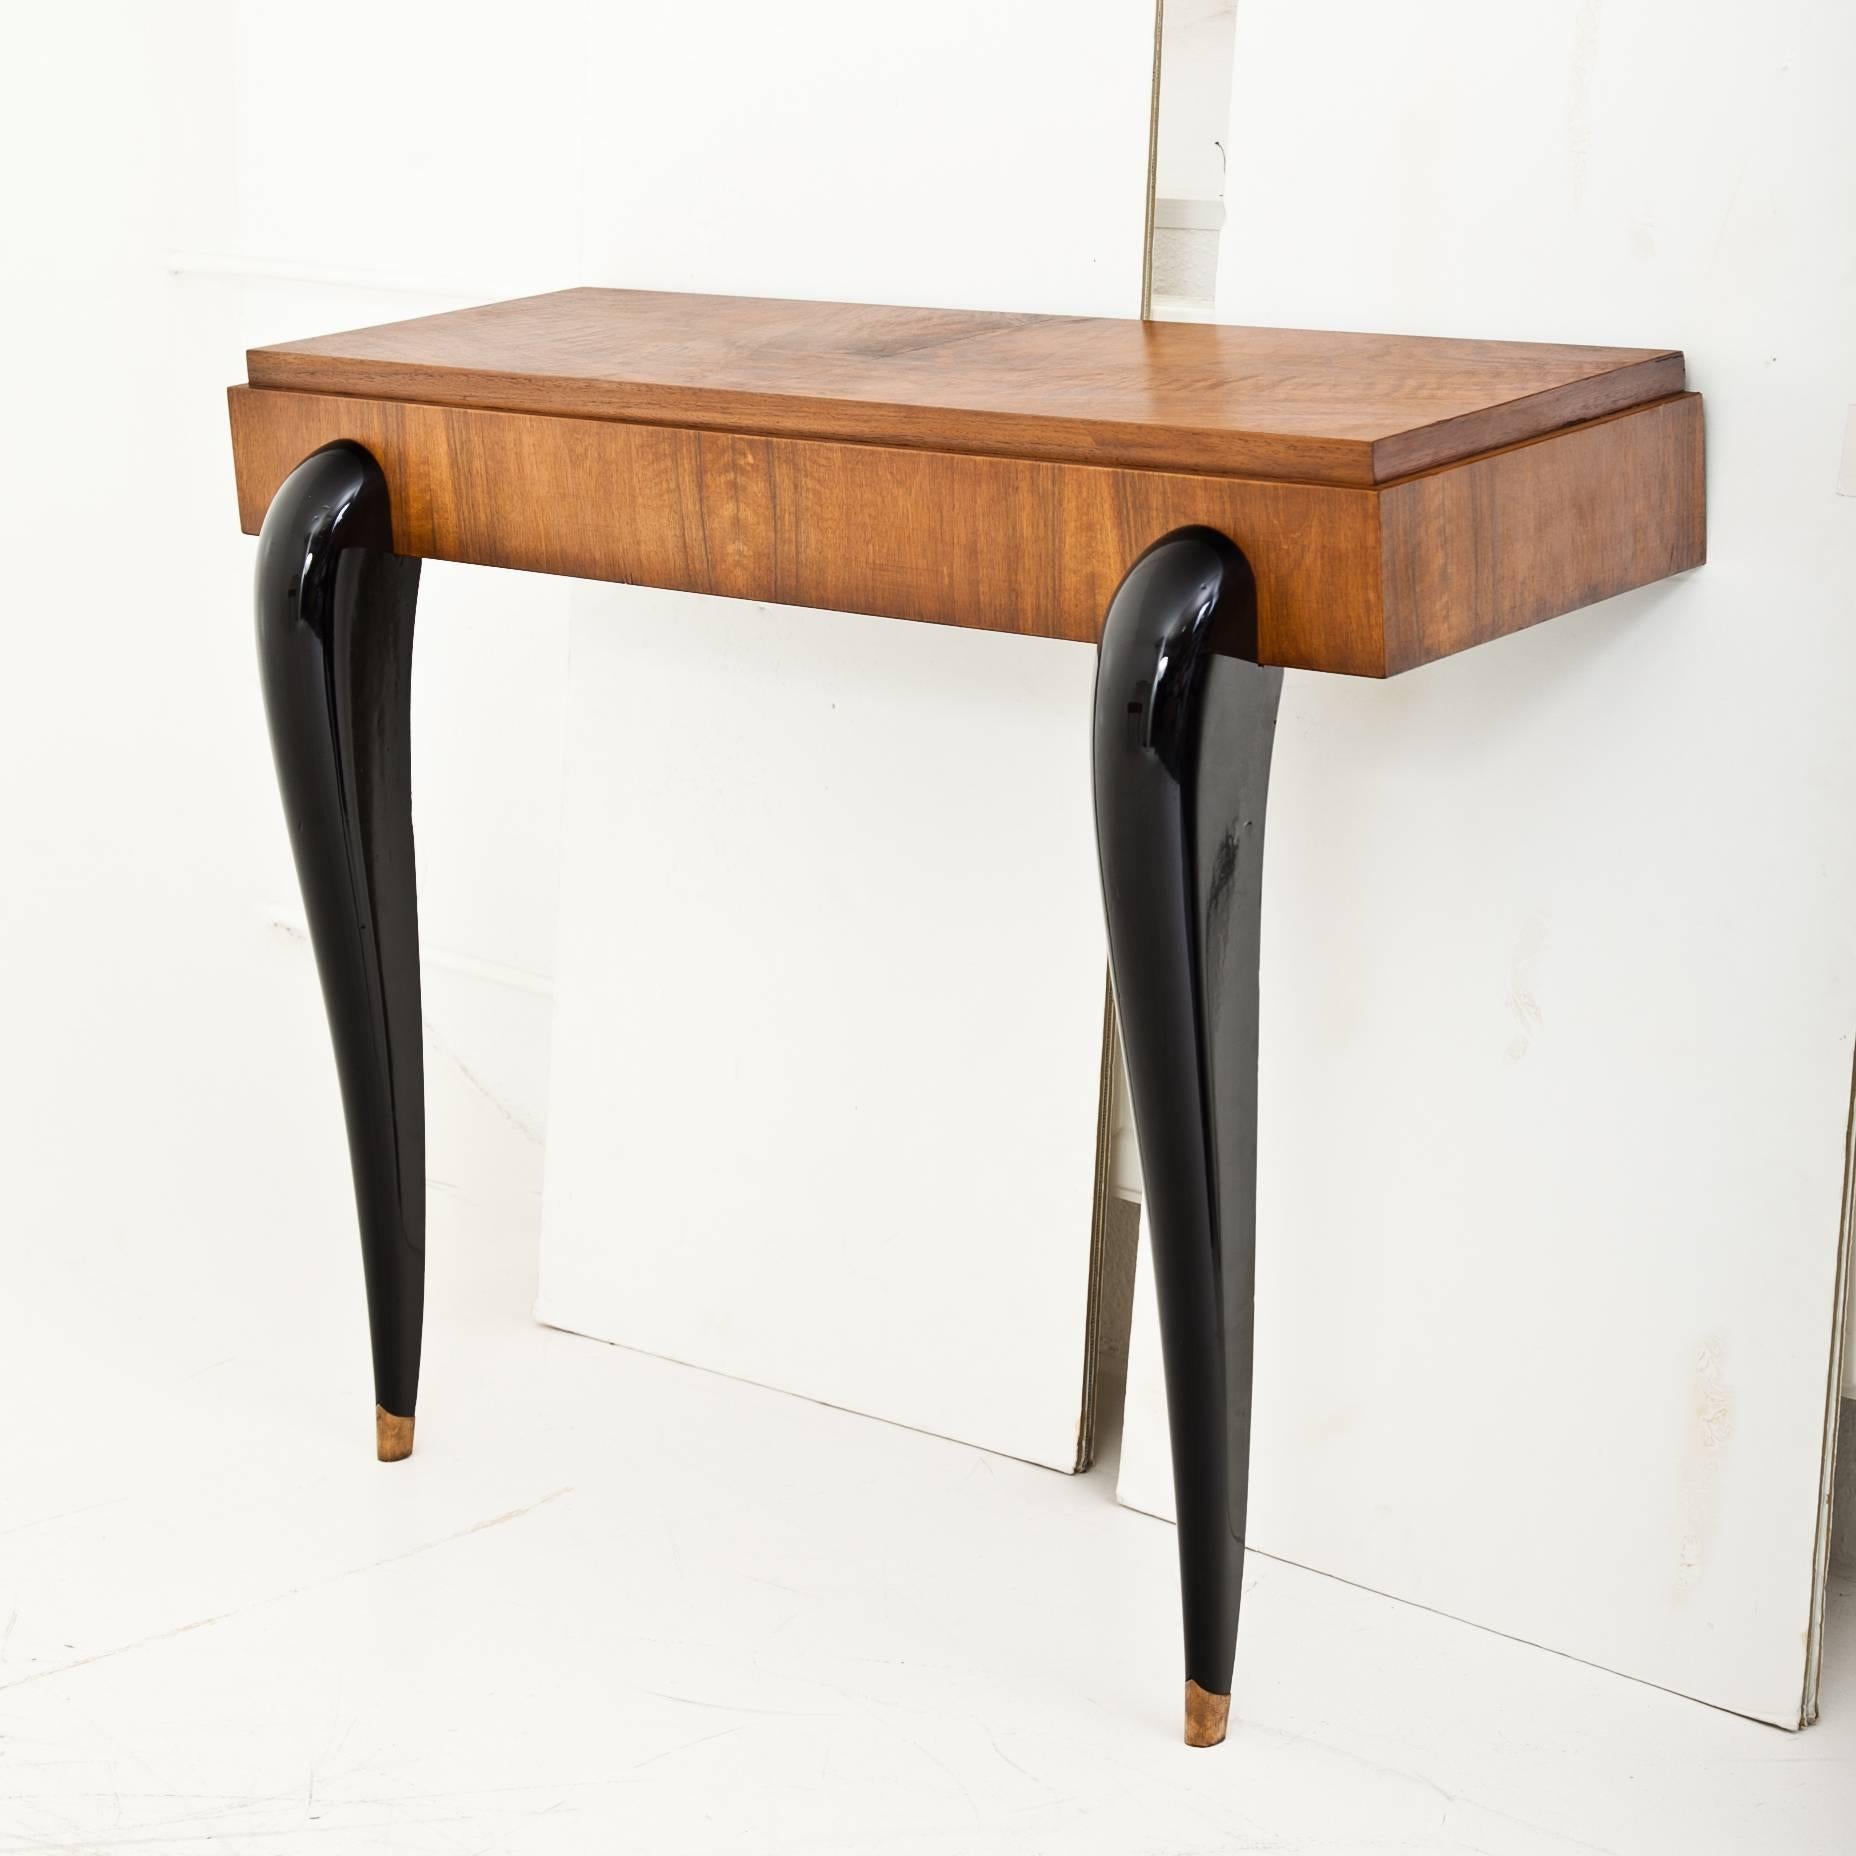 Art Deco-Style Consoles, 20th-21st Century (Holz)